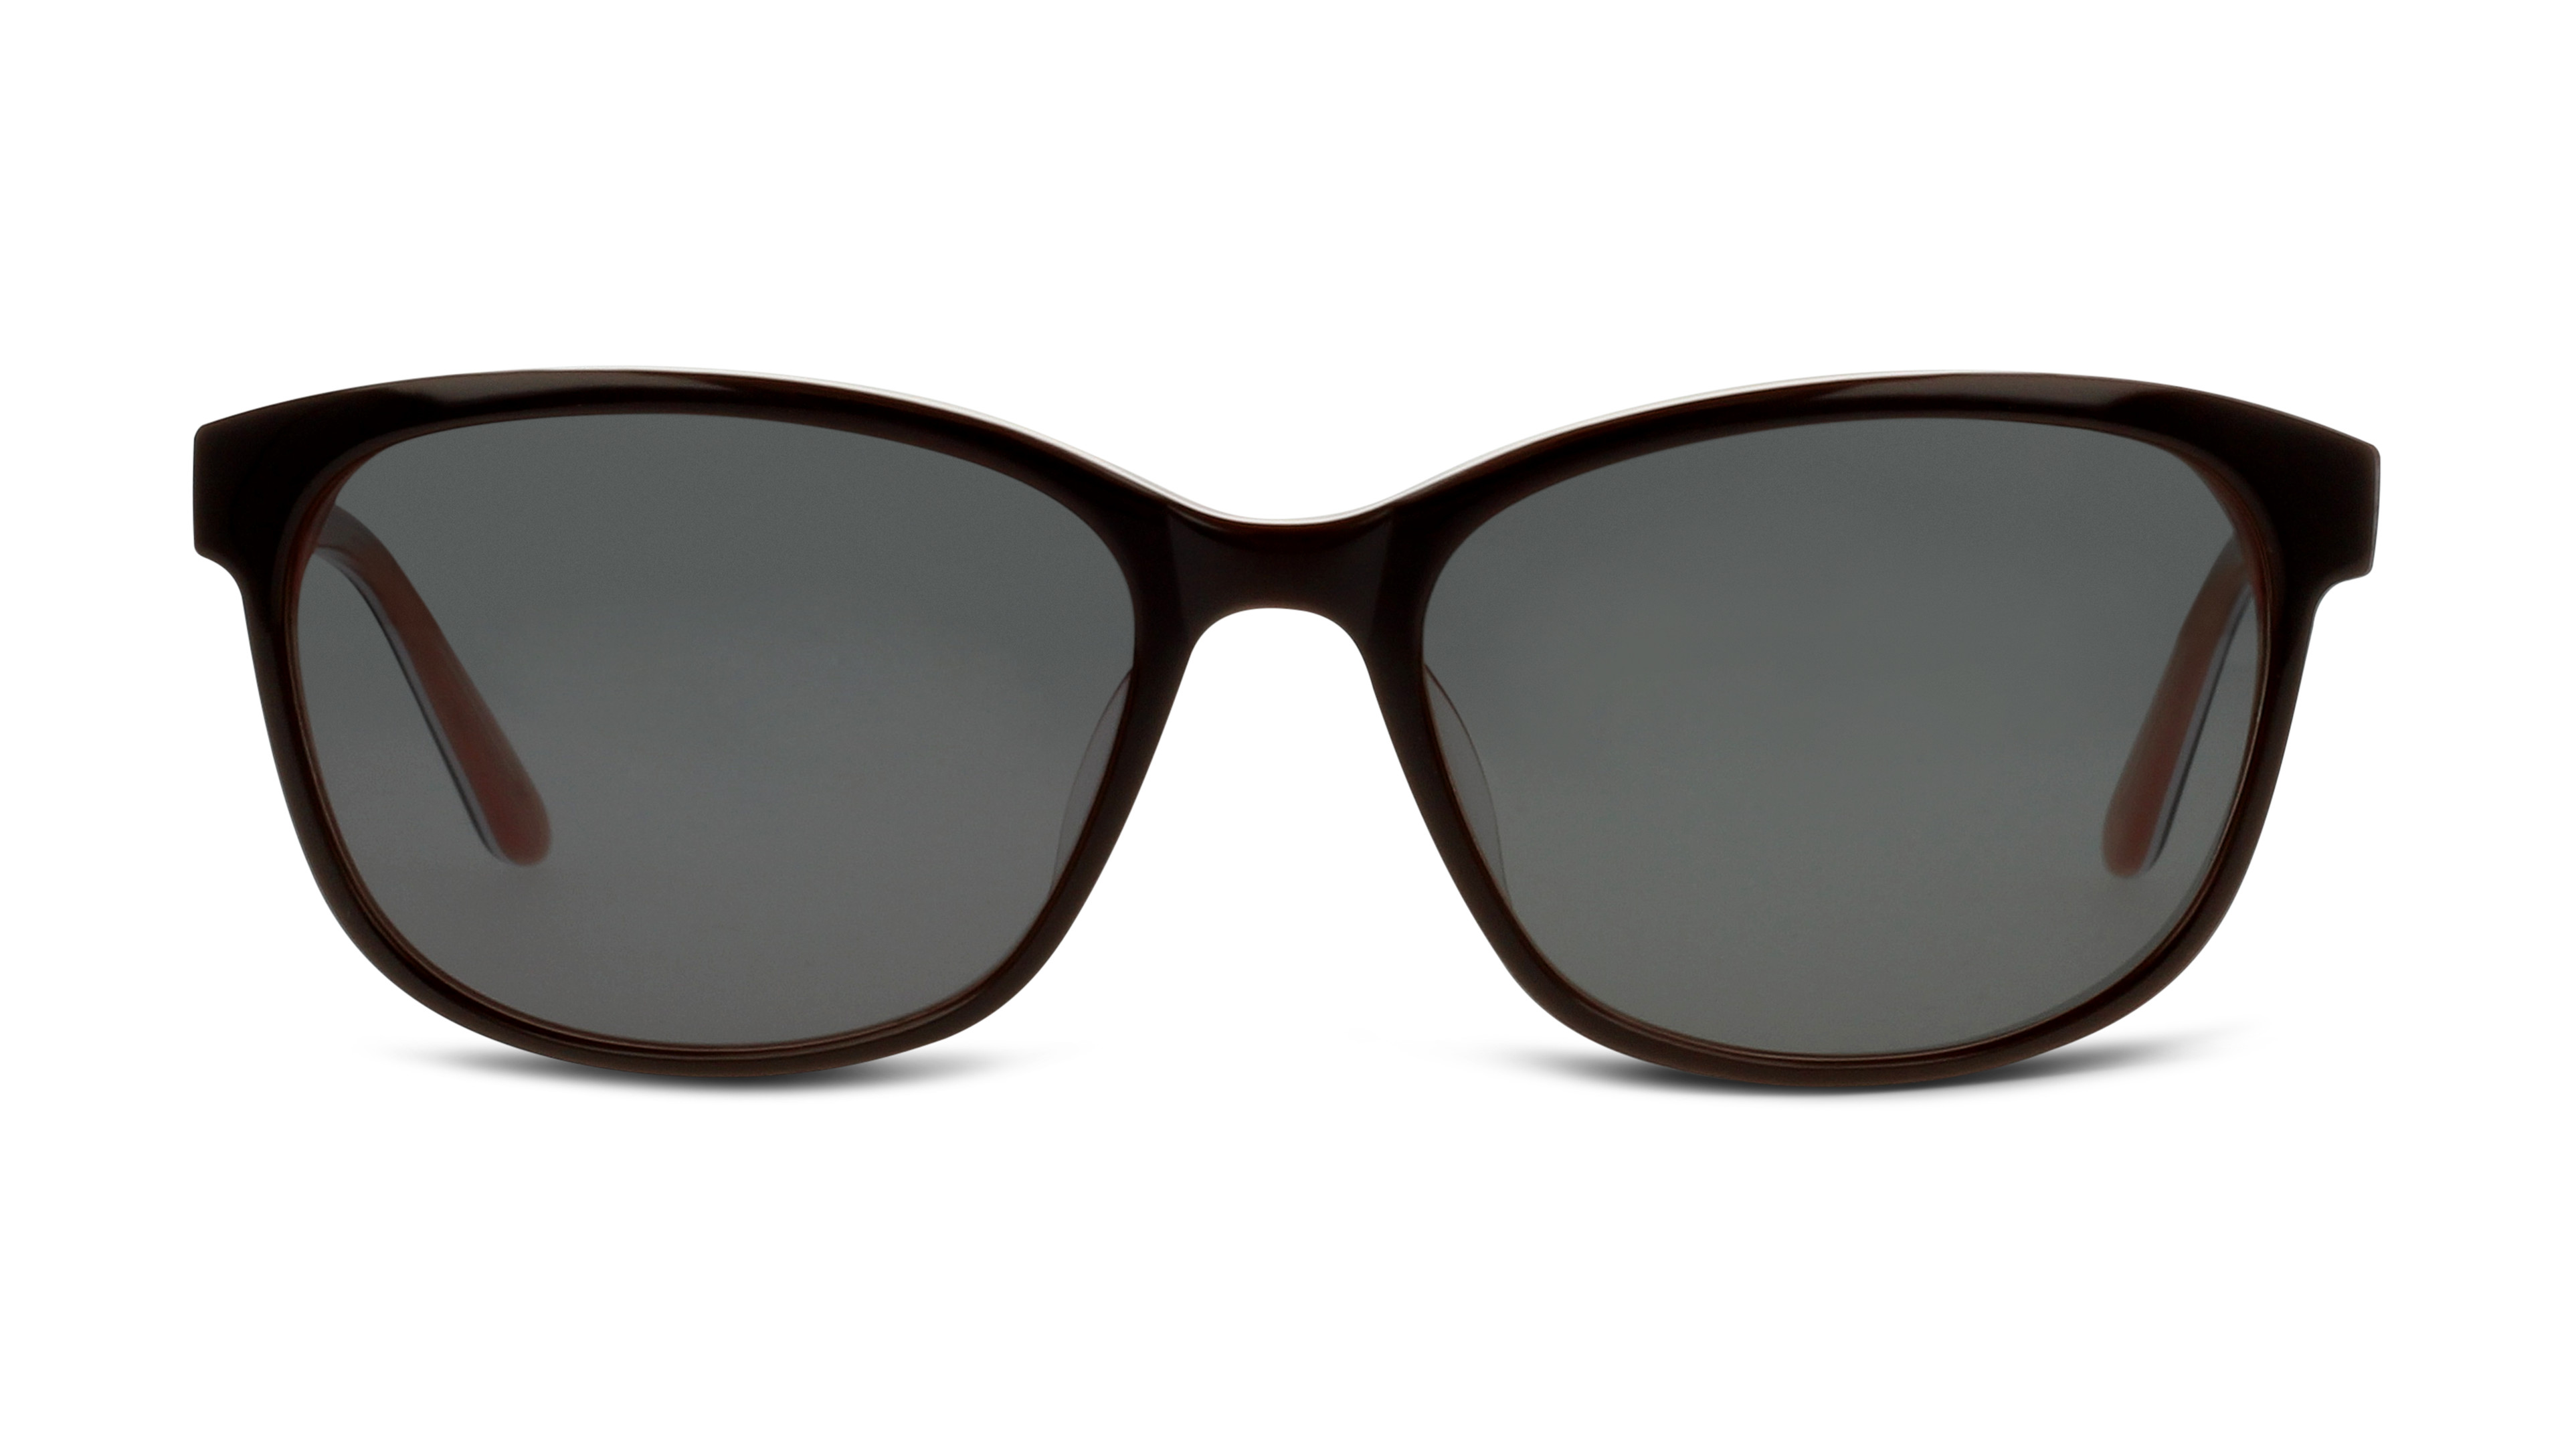 [products.image.front] HUMPHREY´S eyewear 588114 602040 Sonnenbrille